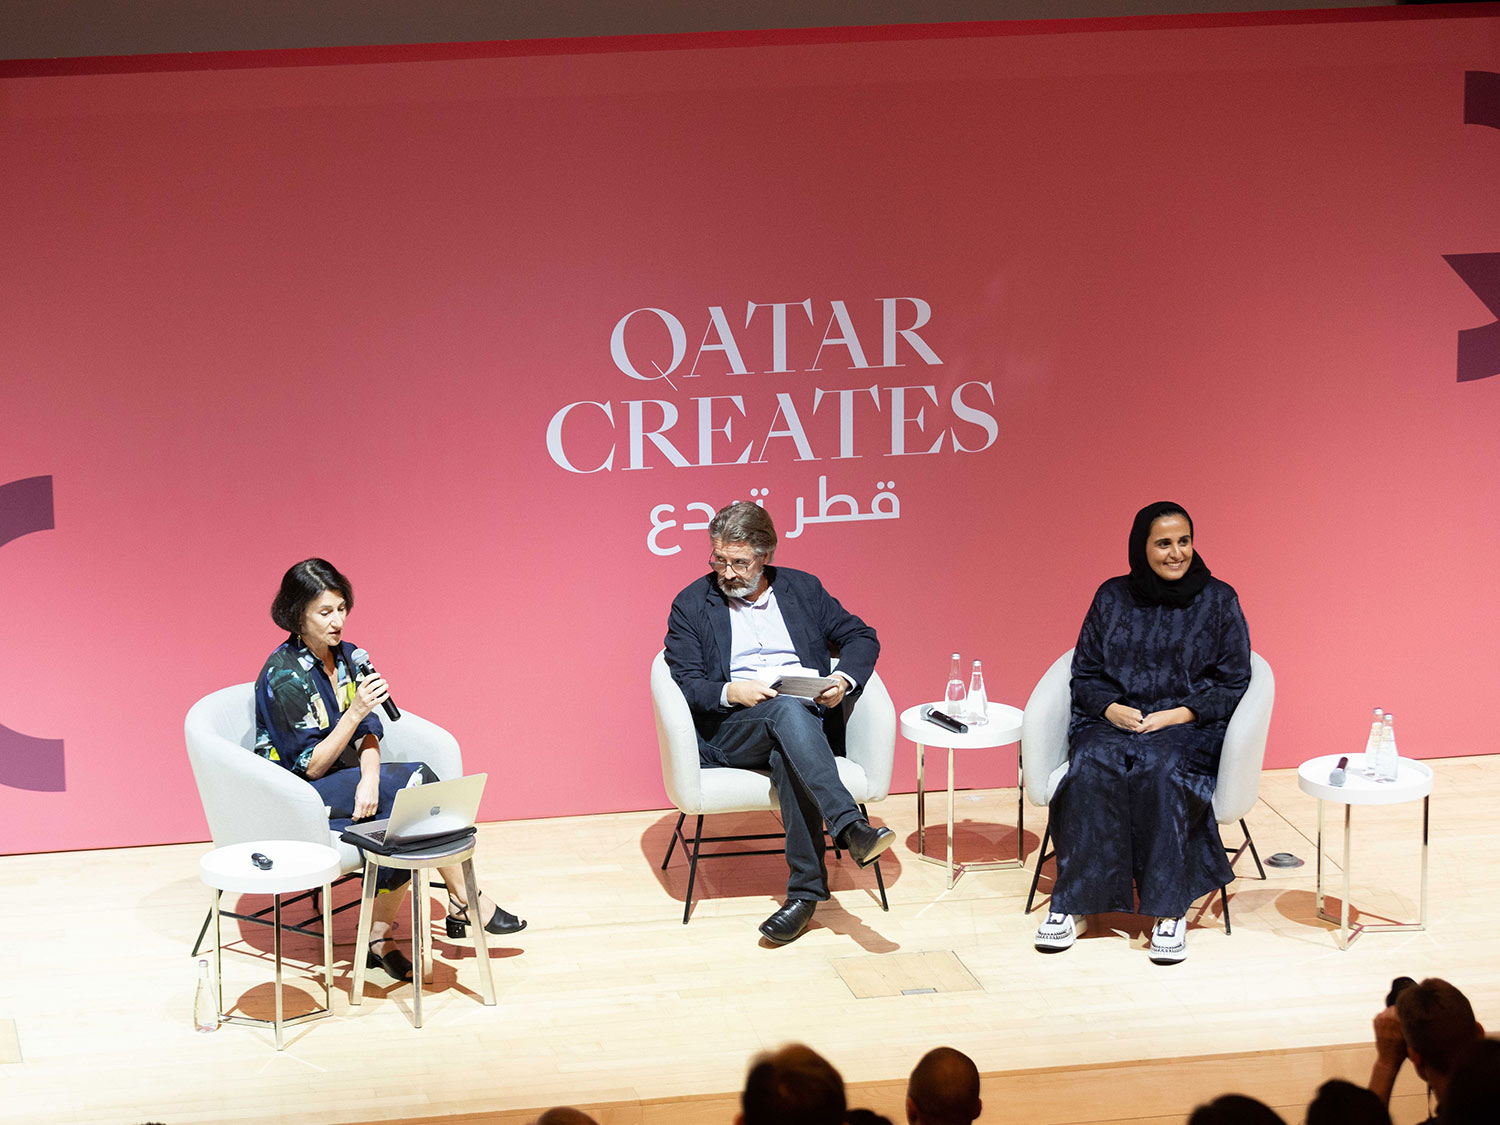 QATAR CREATES PRESENTS SERIES OF PUBLIC CONVERSATIONS ON ART AND SOCIETY WITH LOCAL AND INTERNATIONAL CREATIVE LEADERS